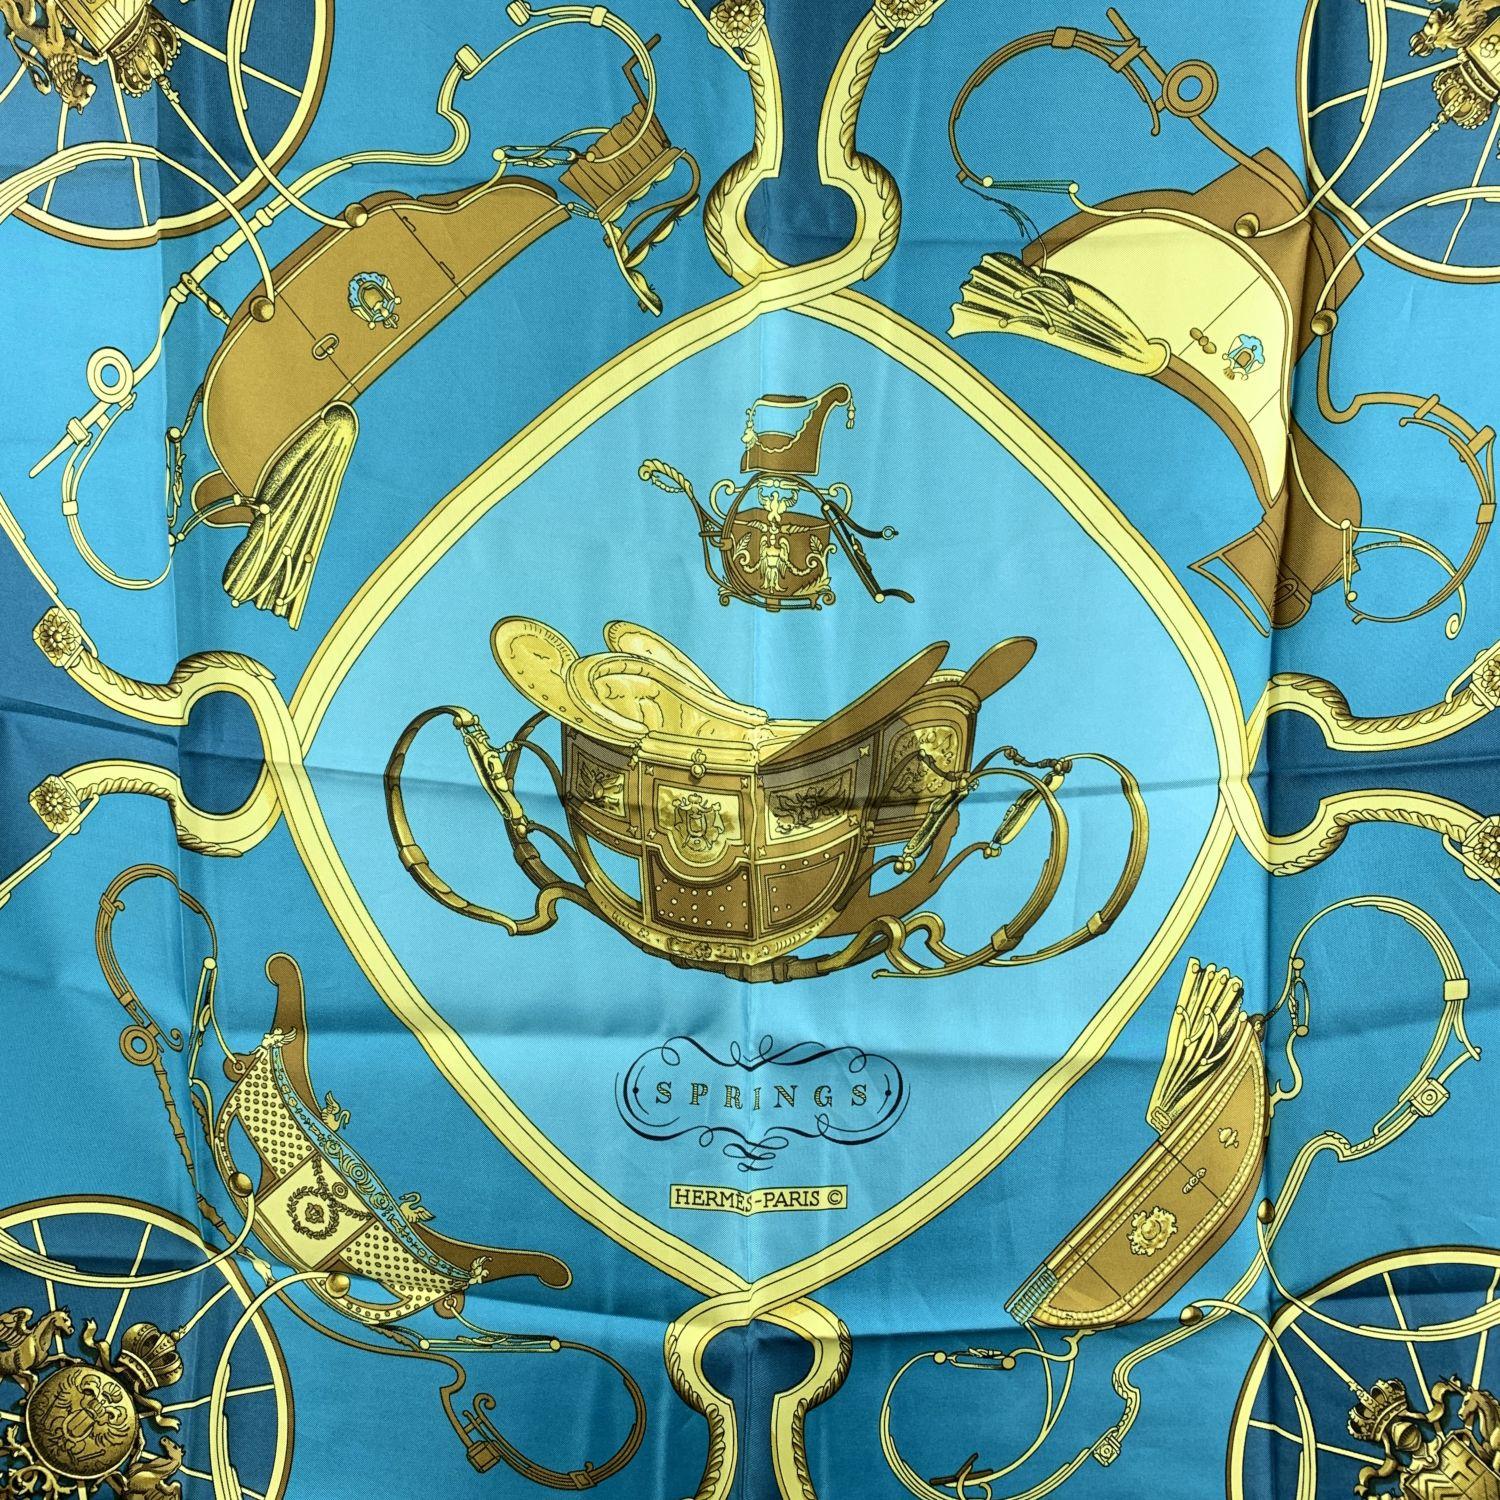 Hermes Paris Vintage Silk Scarf 'Springs' . It depicts in its center the phaeton carriage belonging to Napoleon I's son. Artist :Philippe Ledoux. First Issue : 1974. Main colors are turquoise, teal and yellow gold. Hand rolled hem. Fabric /